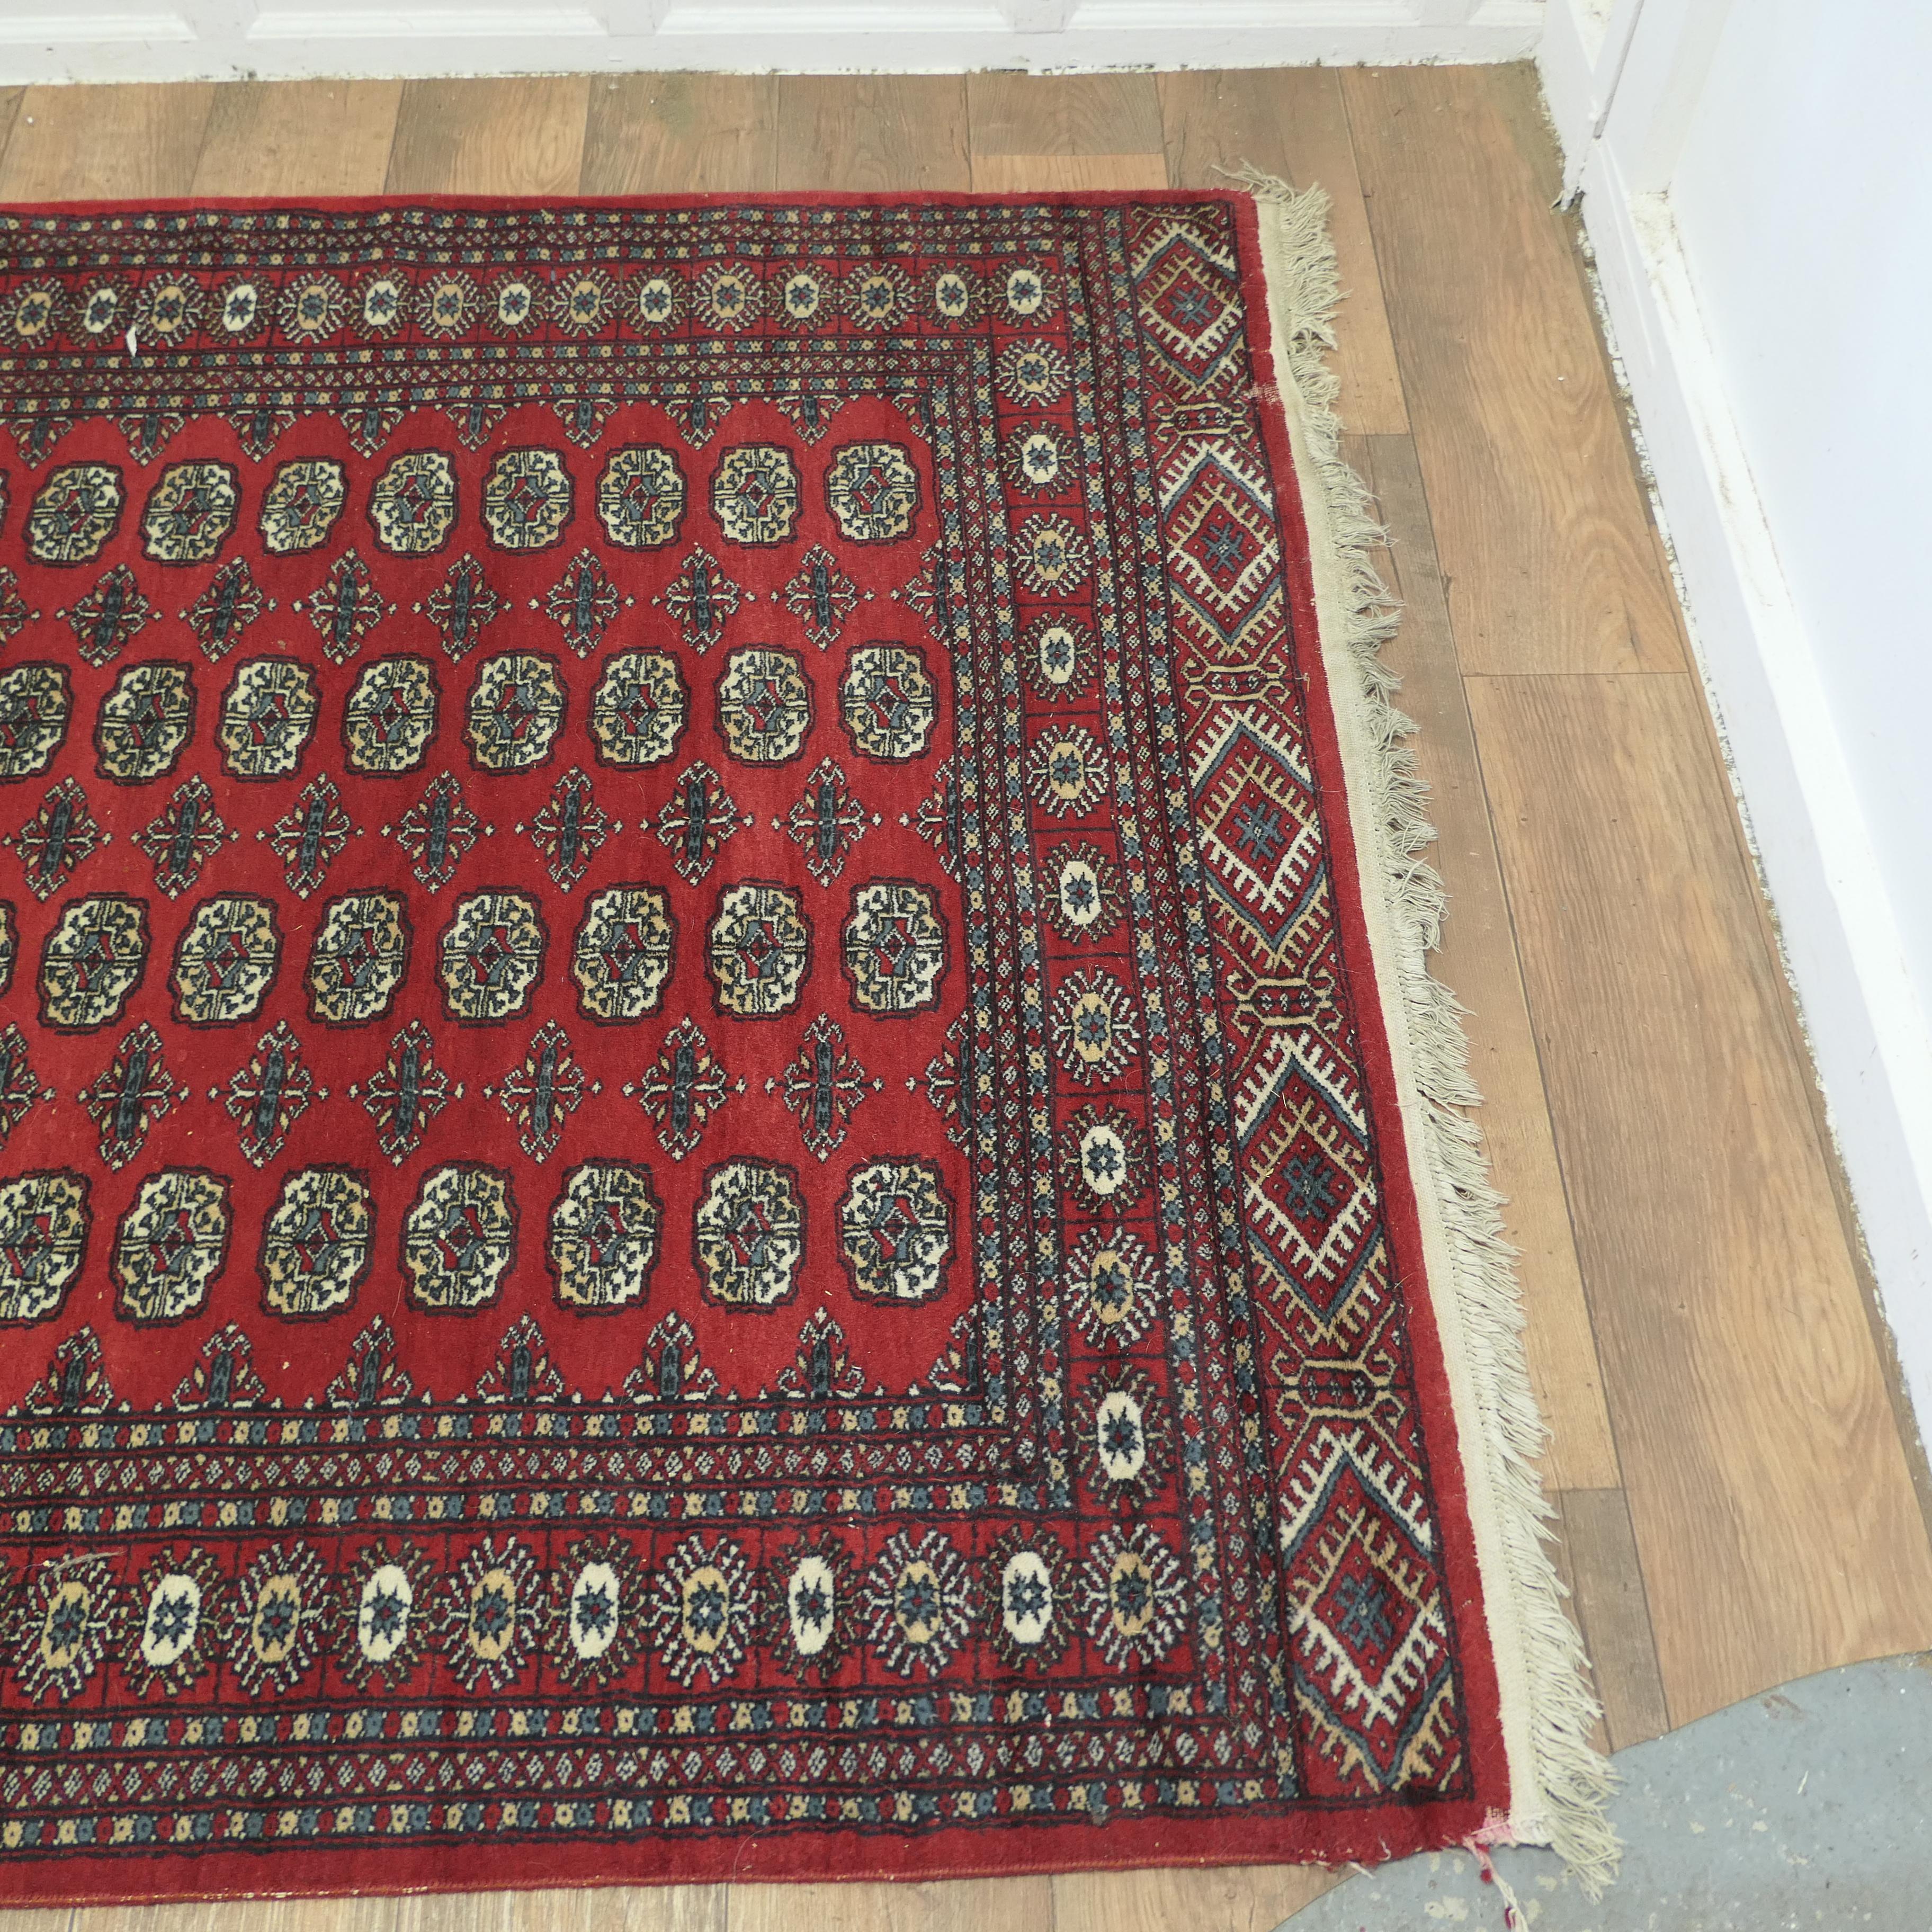 Mid-20th Century A Lovely Bright Red Wool Rug  The Carpet is a wonderful Bright colour   For Sale